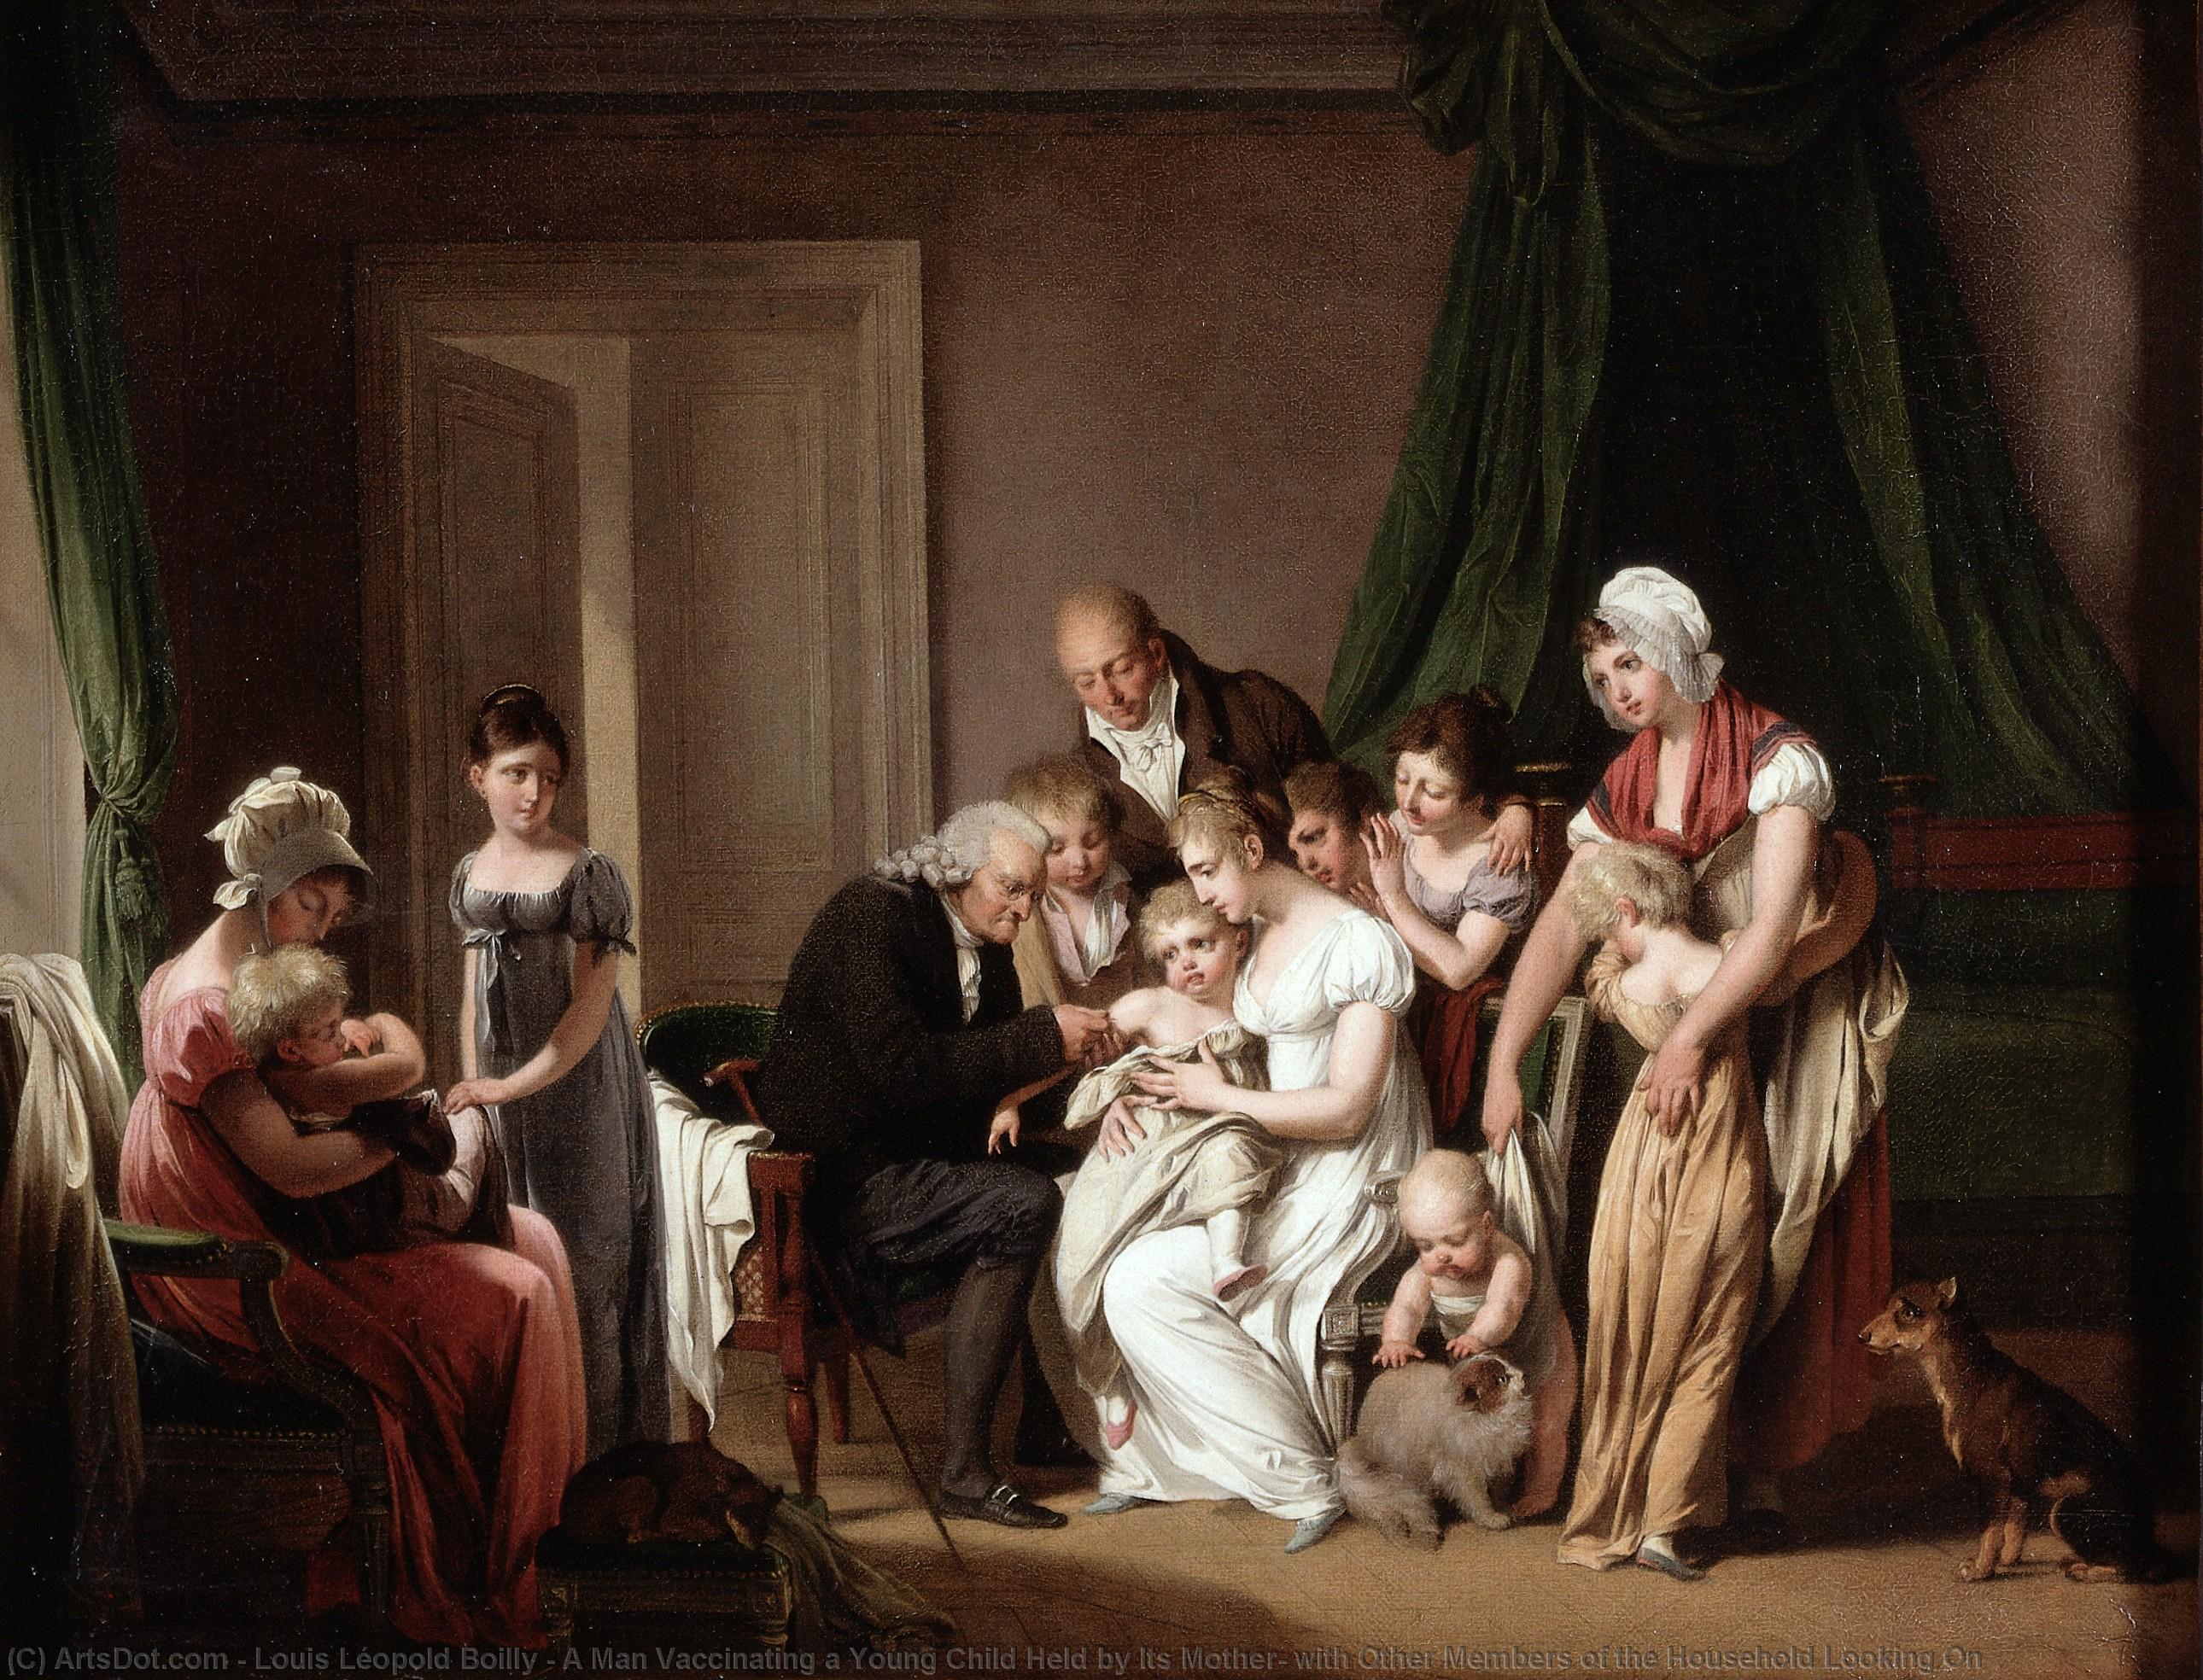 WikiOO.org - دایره المعارف هنرهای زیبا - نقاشی، آثار هنری Louis Léopold Boilly - A Man Vaccinating a Young Child Held by Its Mother, with Other Members of the Household Looking On